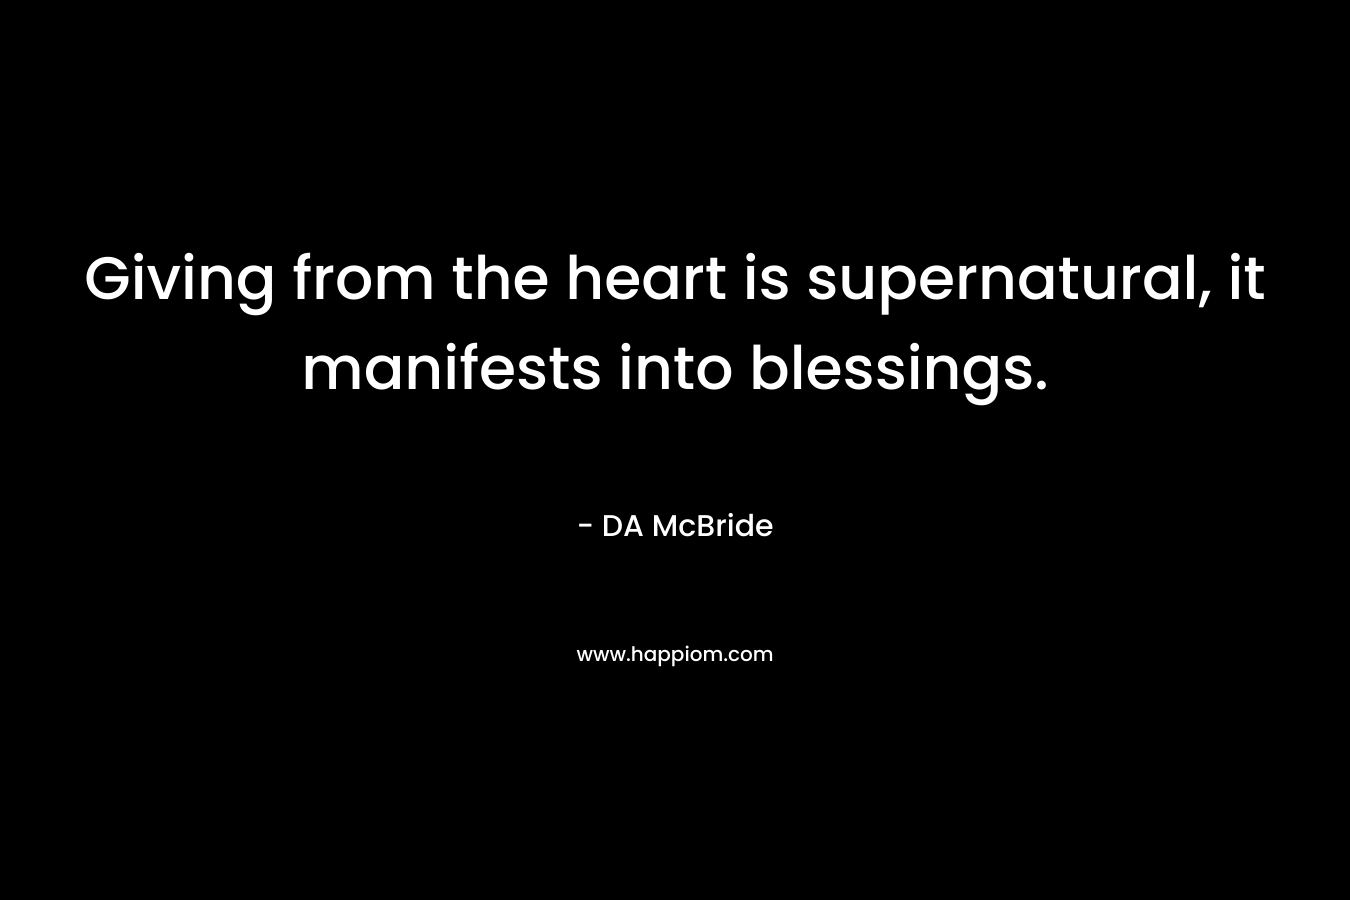 Giving from the heart is supernatural, it manifests into blessings.